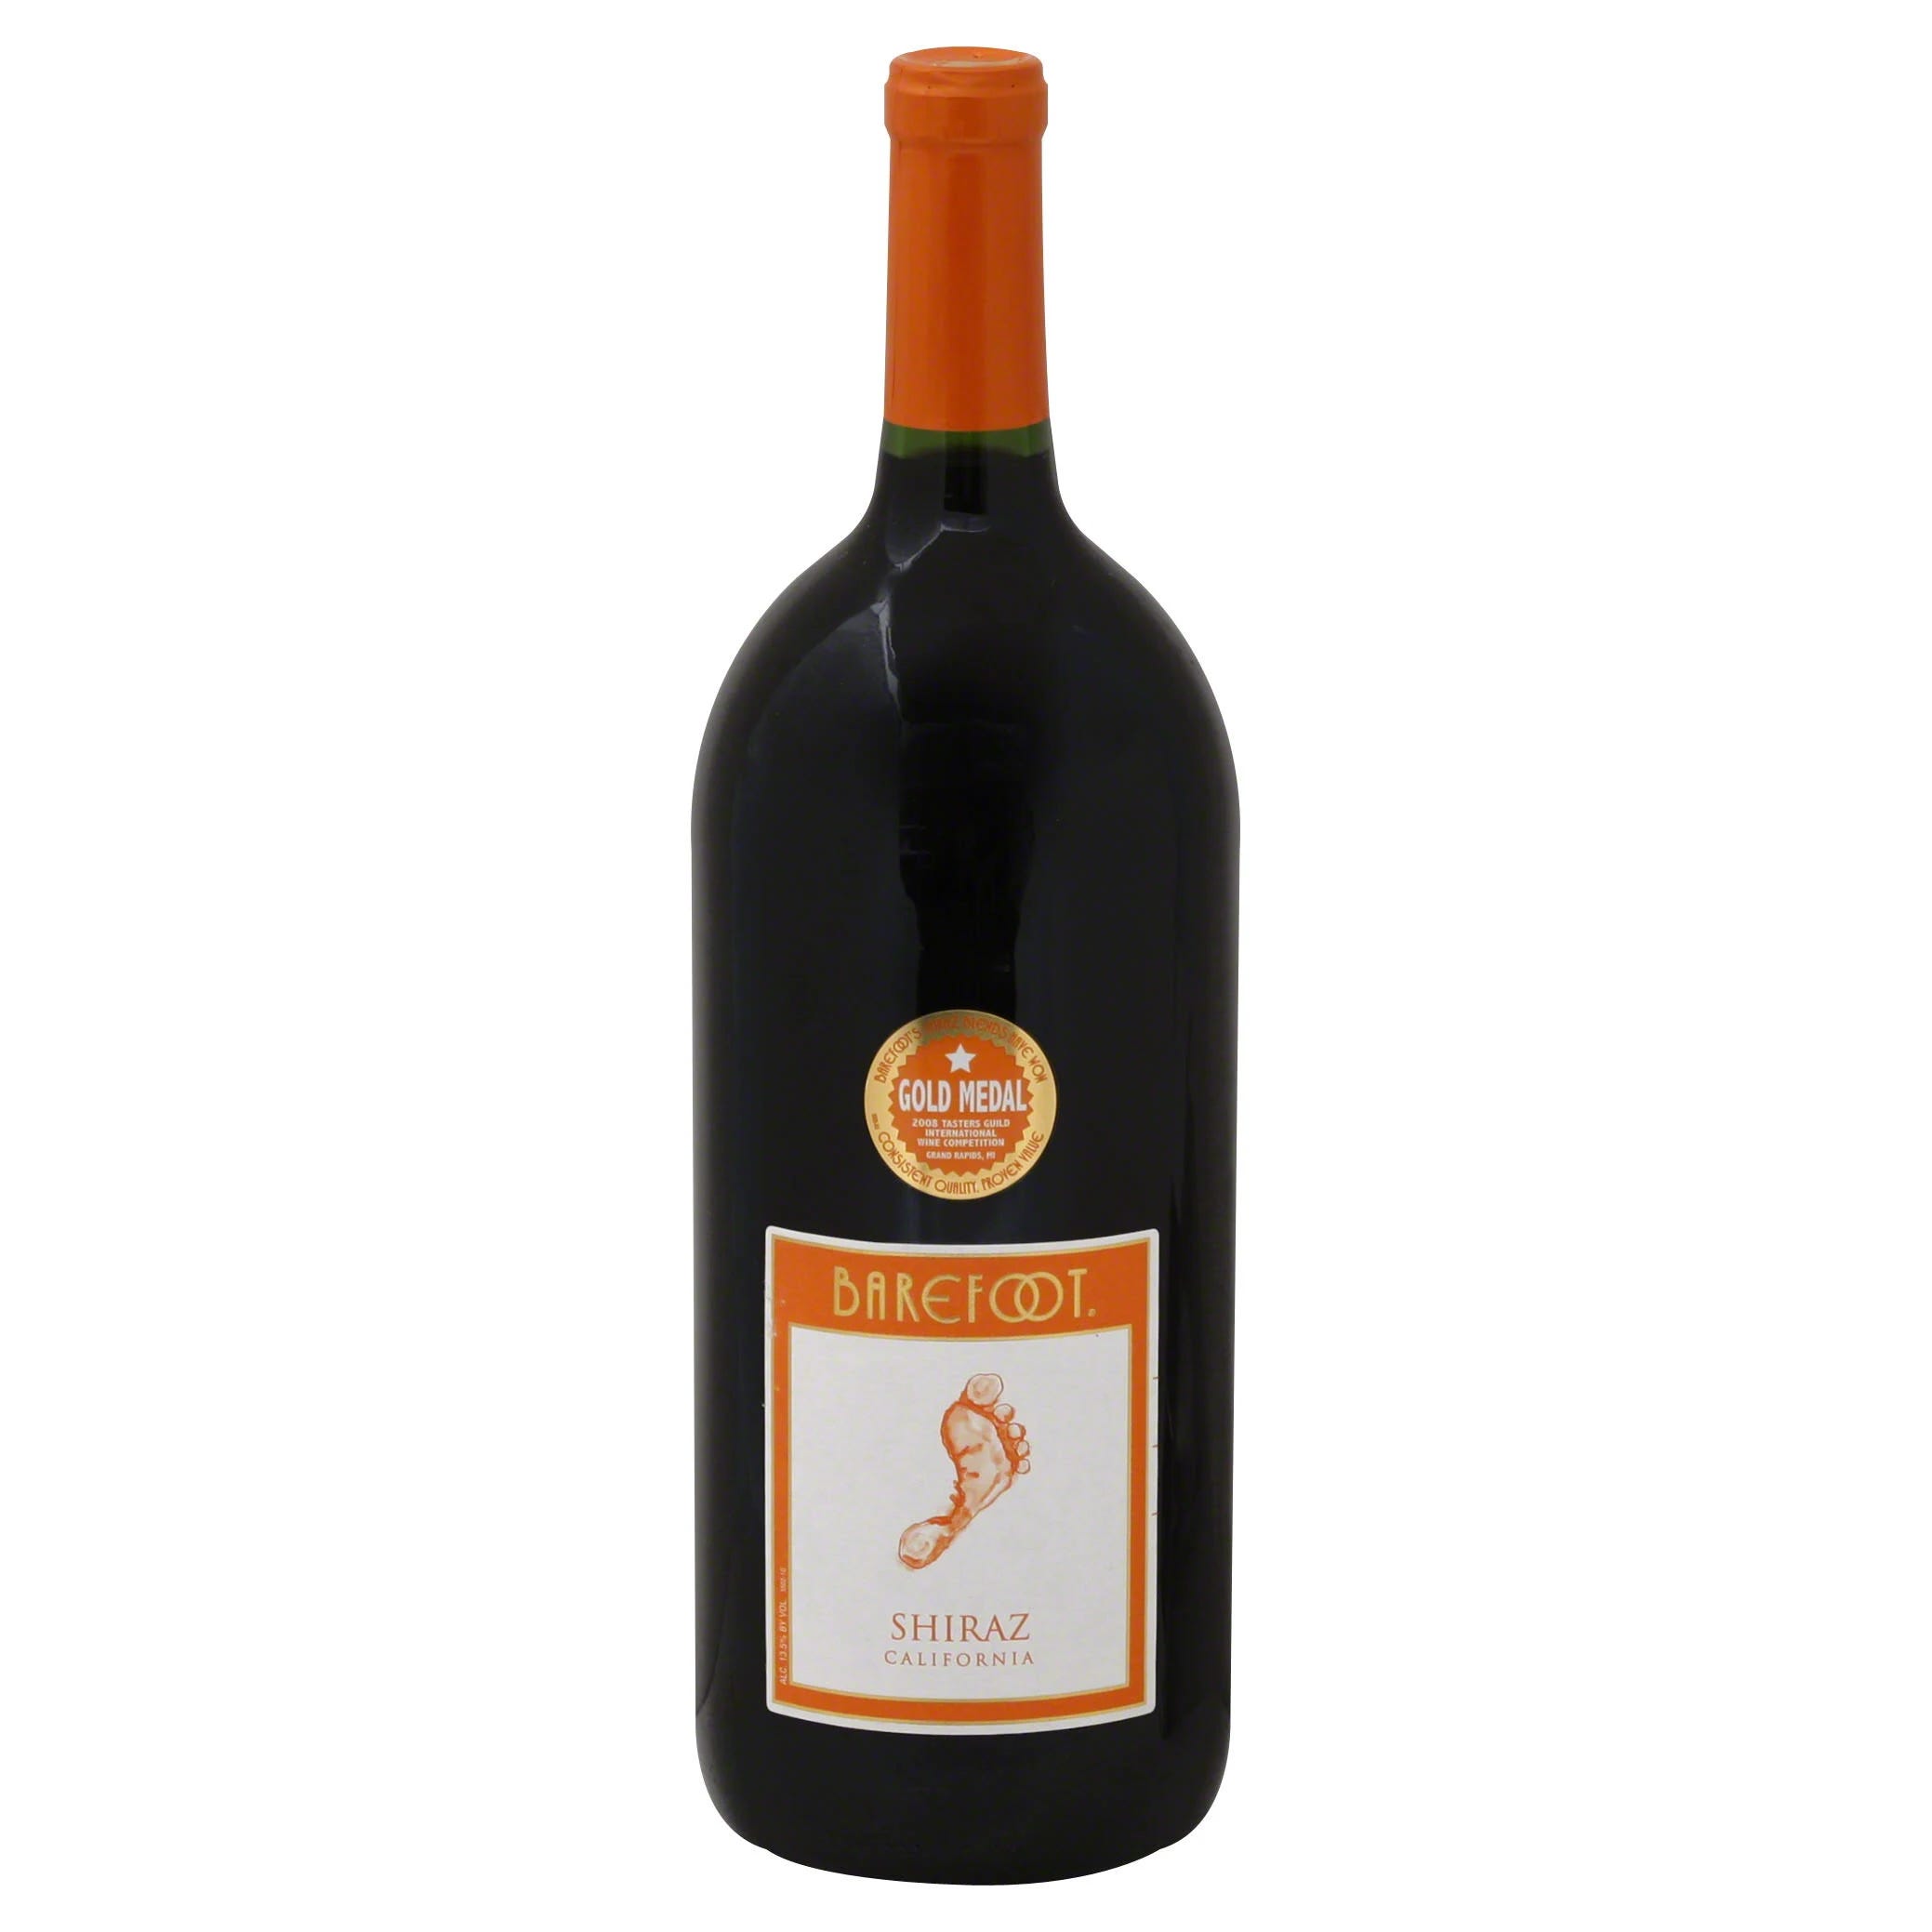 Barefoot California Shiraz: Robust Red Wine with Cherry and Raspberry Flavors | Image